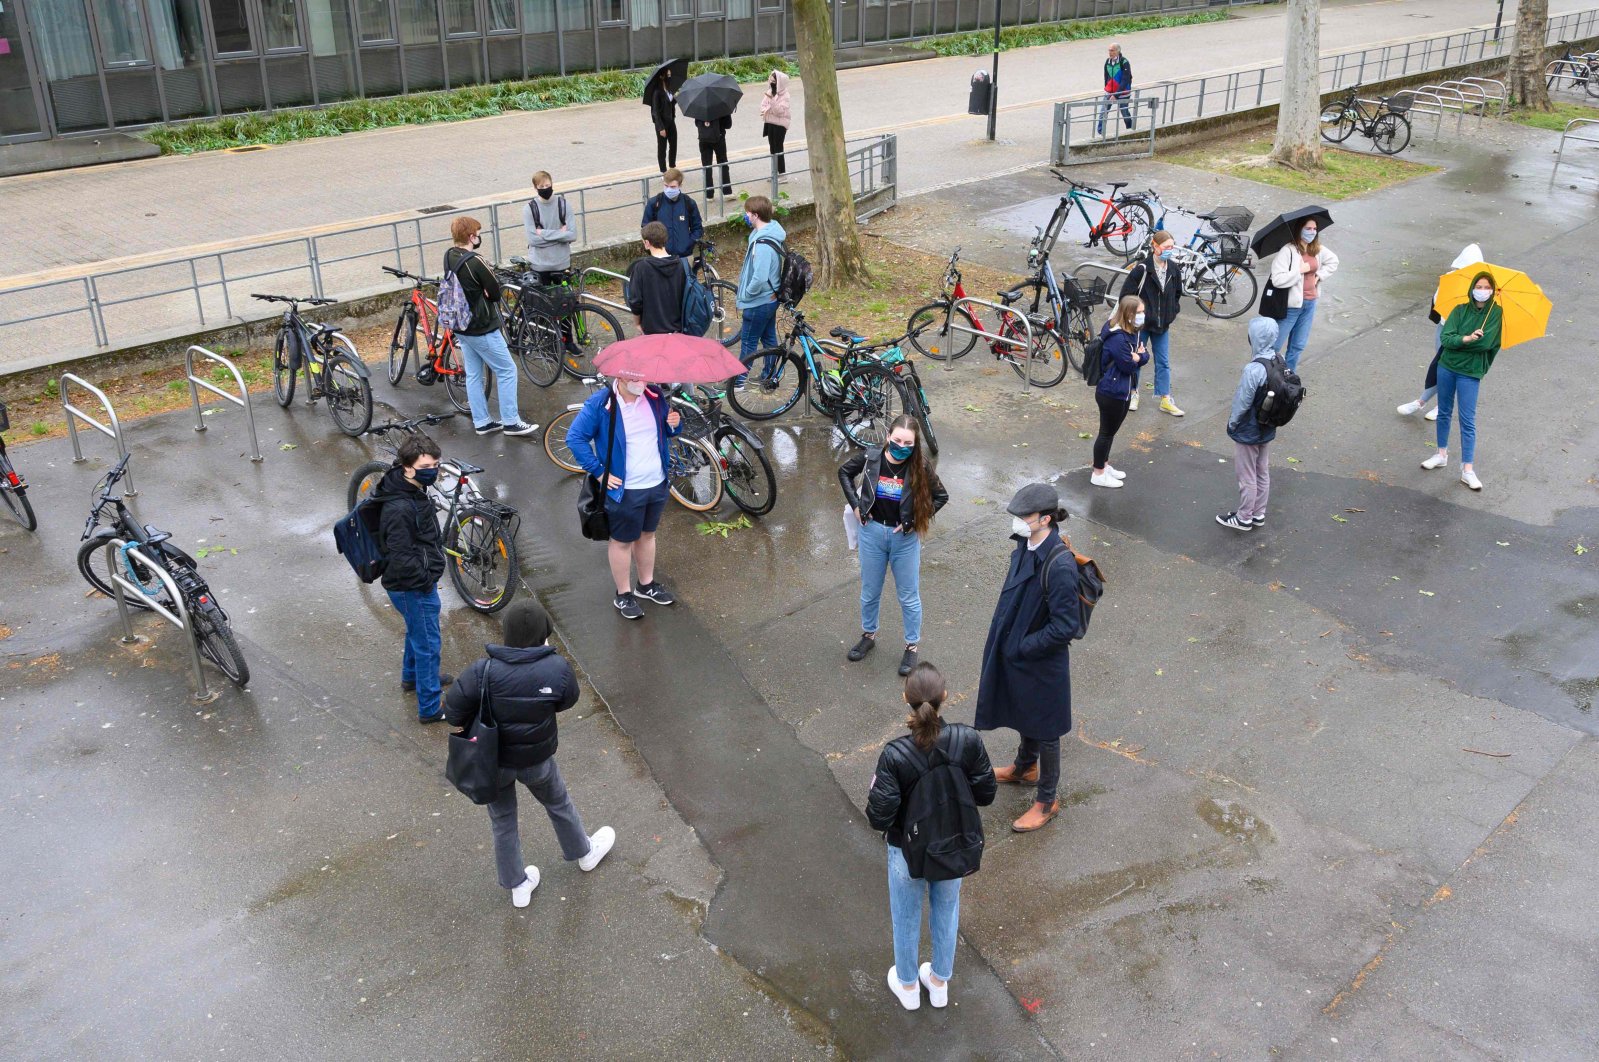 Students wearing face masks keep their distance as they talk to each other during a break at the Friedrich-Schiller-Gymnasium, Ludwigsburg, May 4, 2020. (AFP Photo)